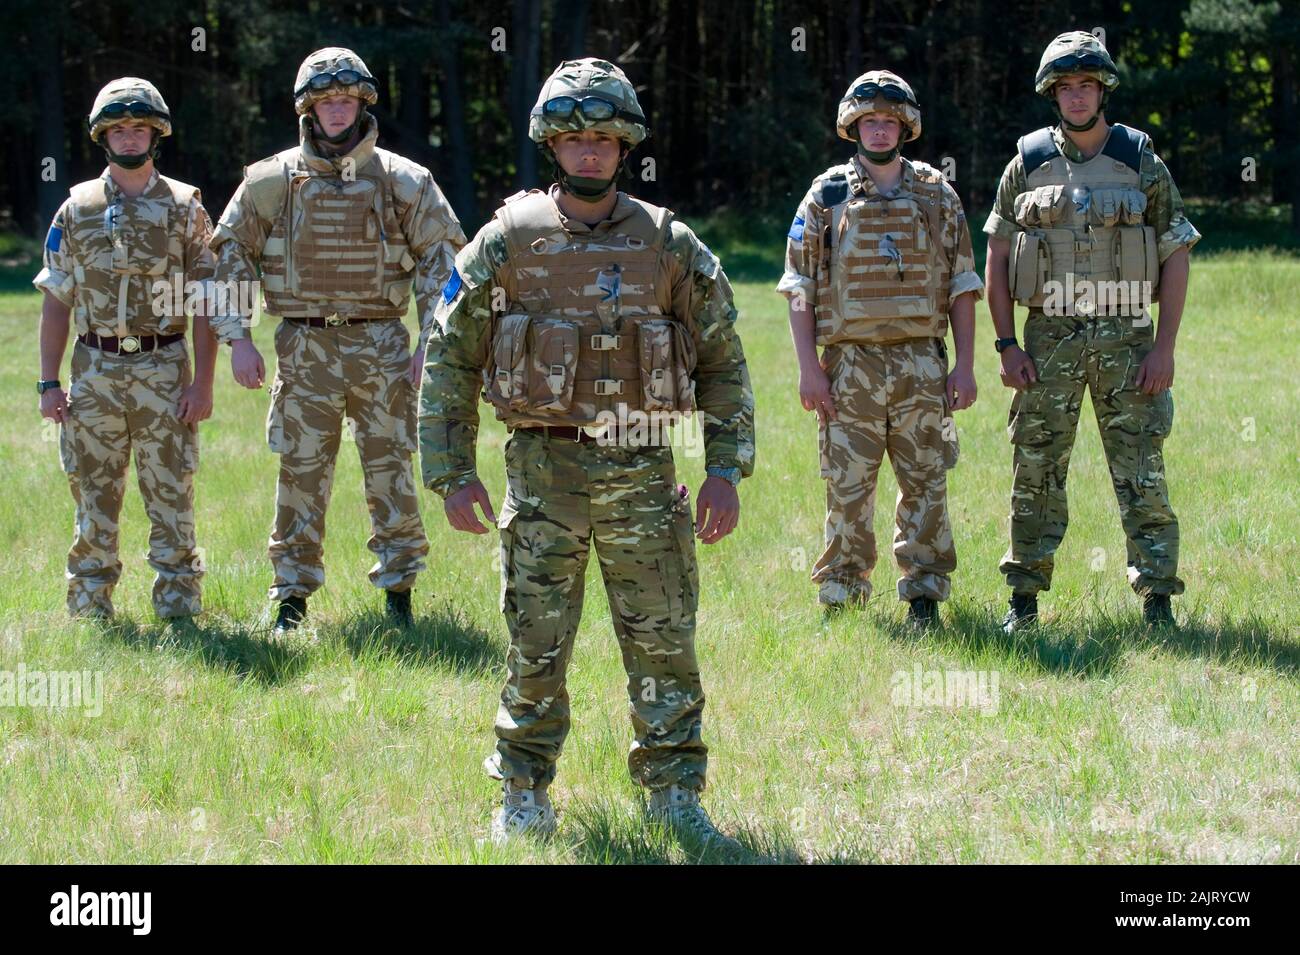 The progression of uniform design for the British soldier, which has changed every year since 2006, from desert camouflage to the new all terrain camouflage. Stock Photo